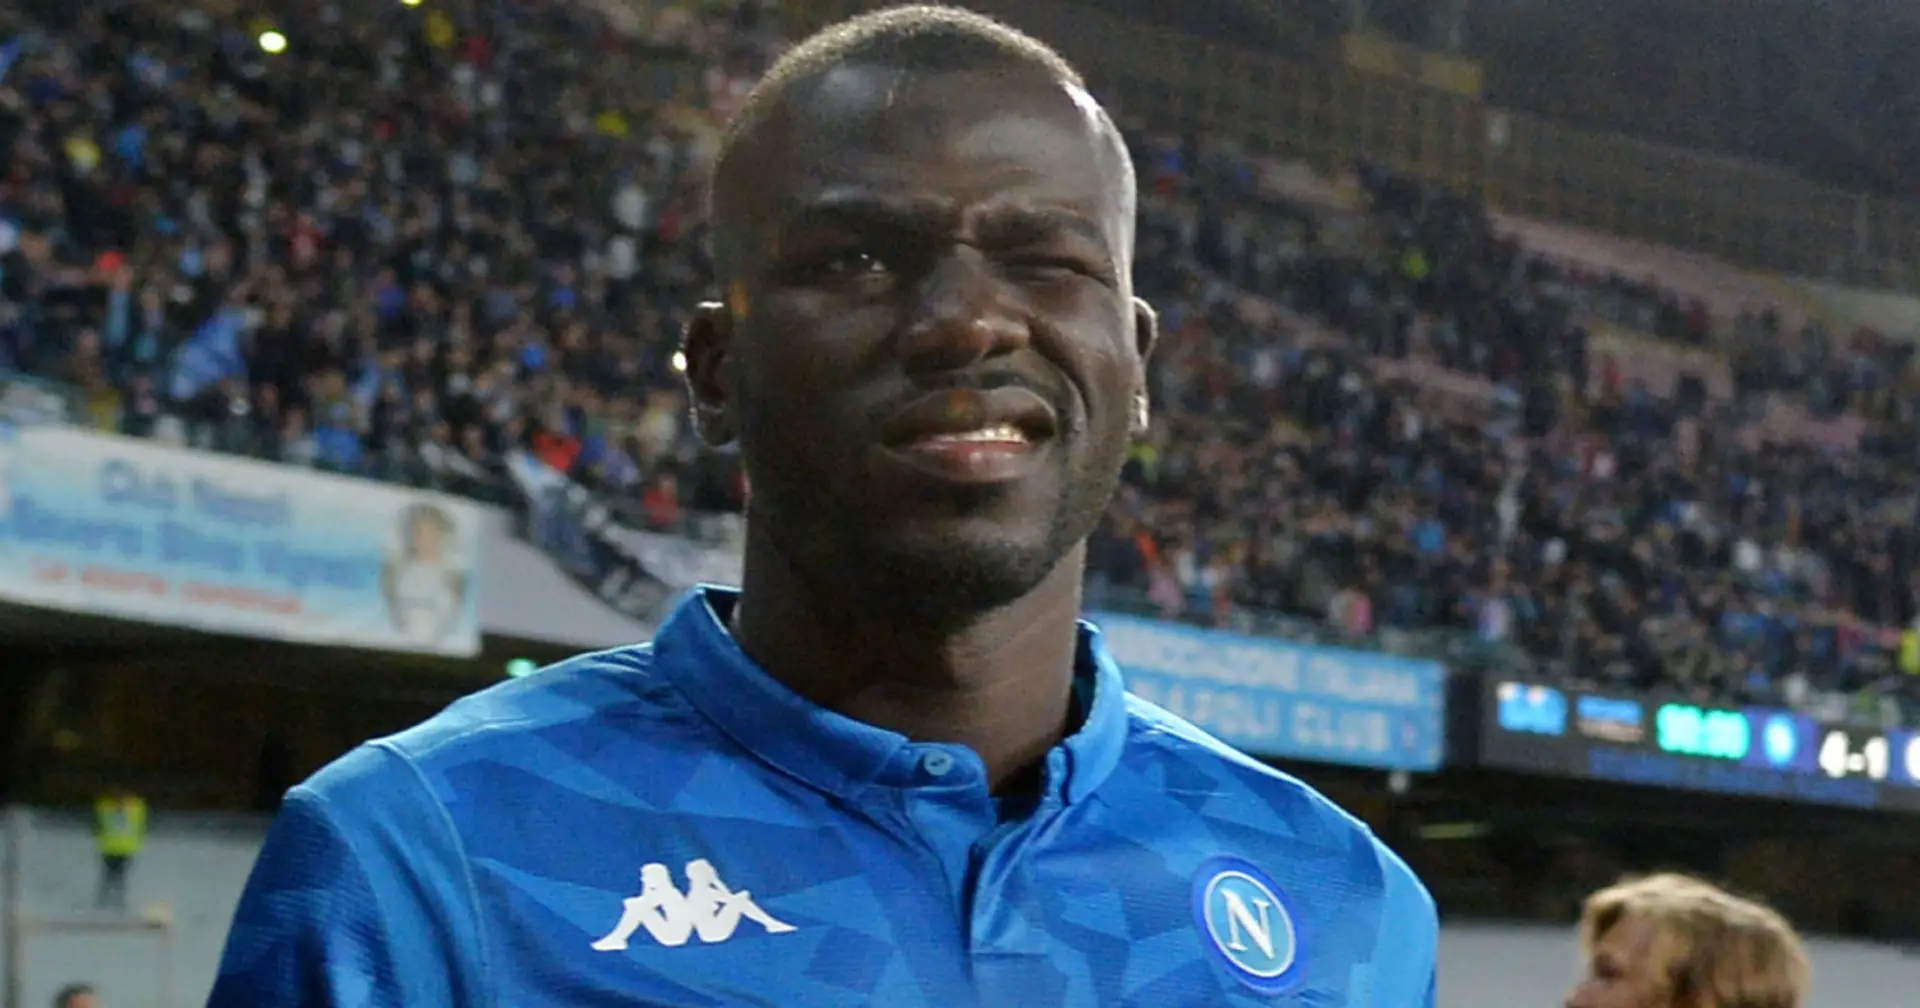 Serie A club interested in Koulibaly - they could offer more than Barca (reliability: 4 stars)